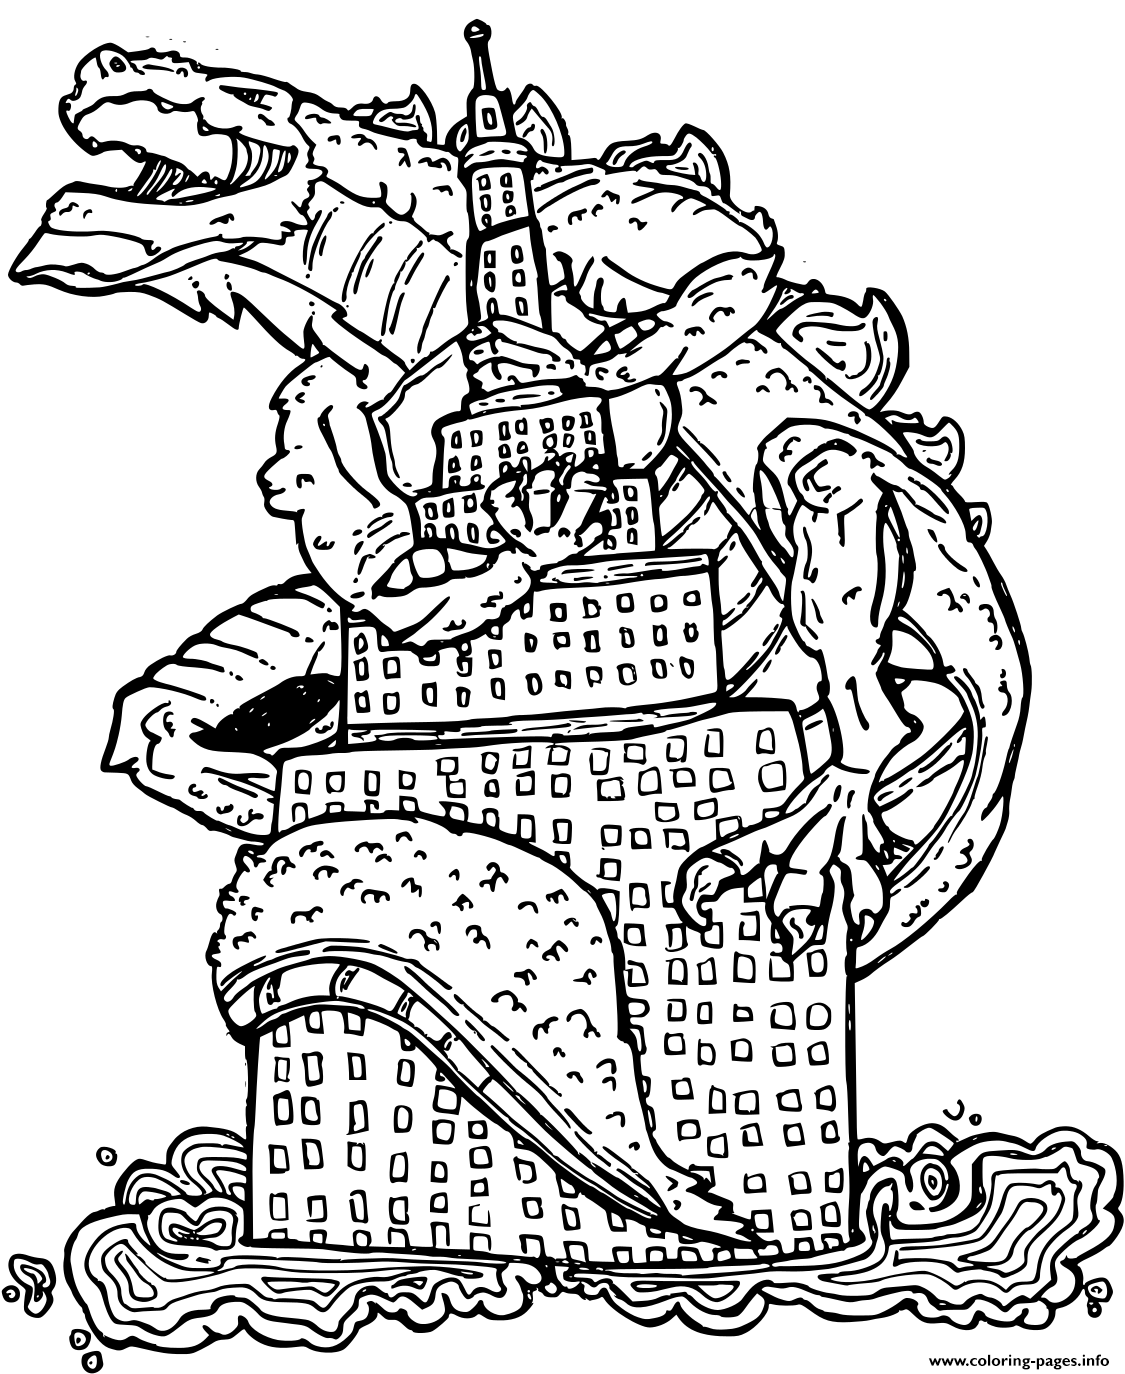 Godzilla Went Up On A Building Coloring Pages Printable